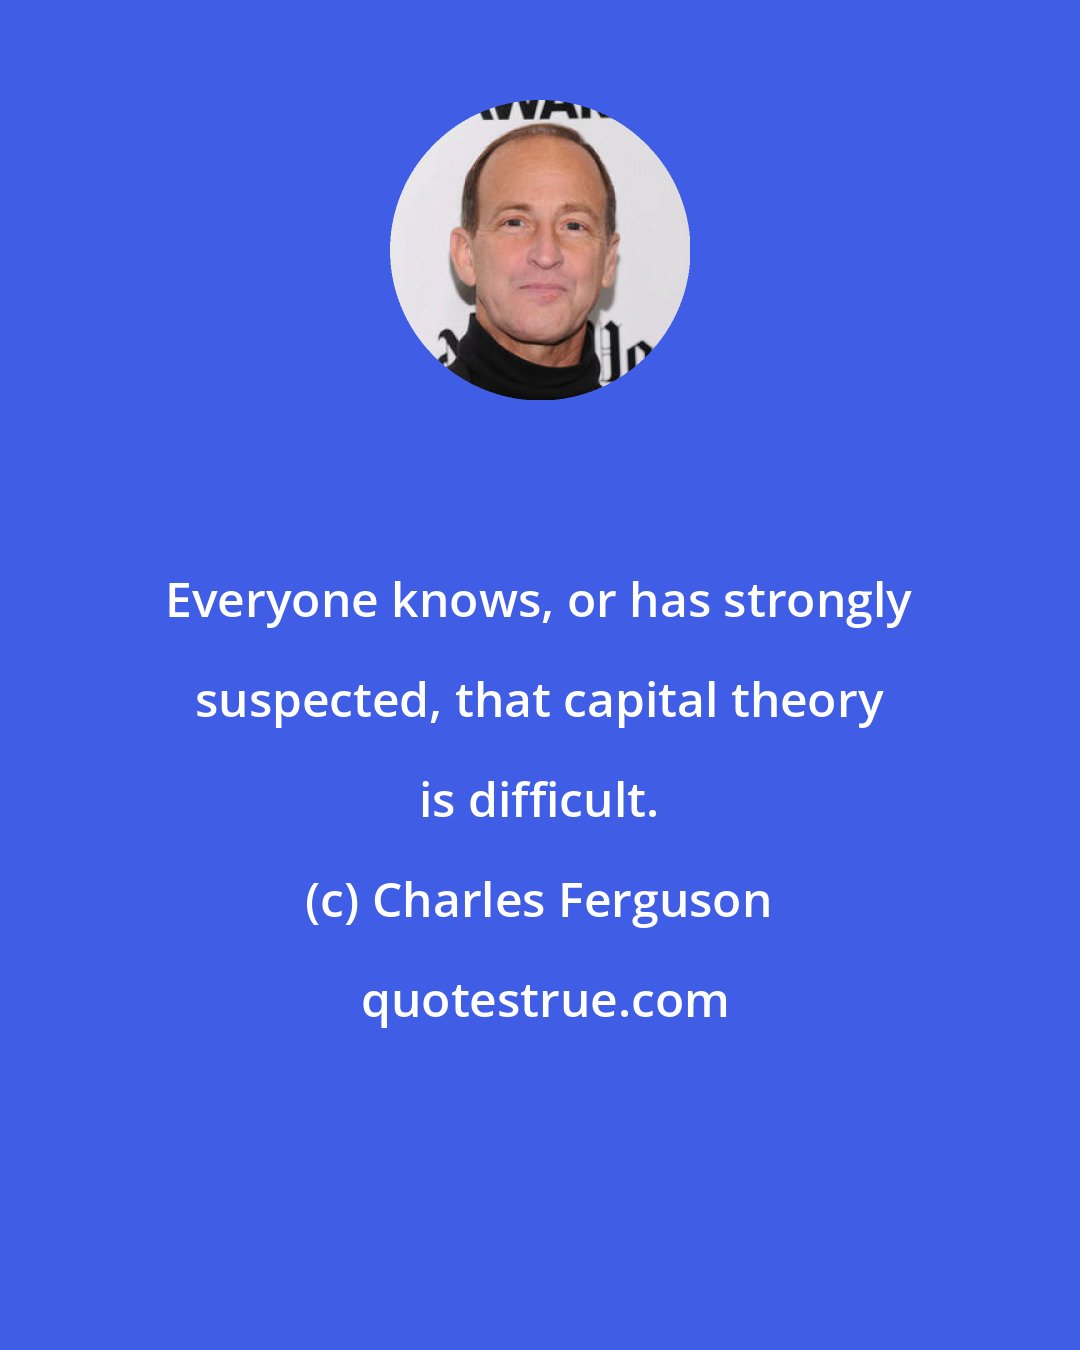 Charles Ferguson: Everyone knows, or has strongly suspected, that capital theory is difficult.